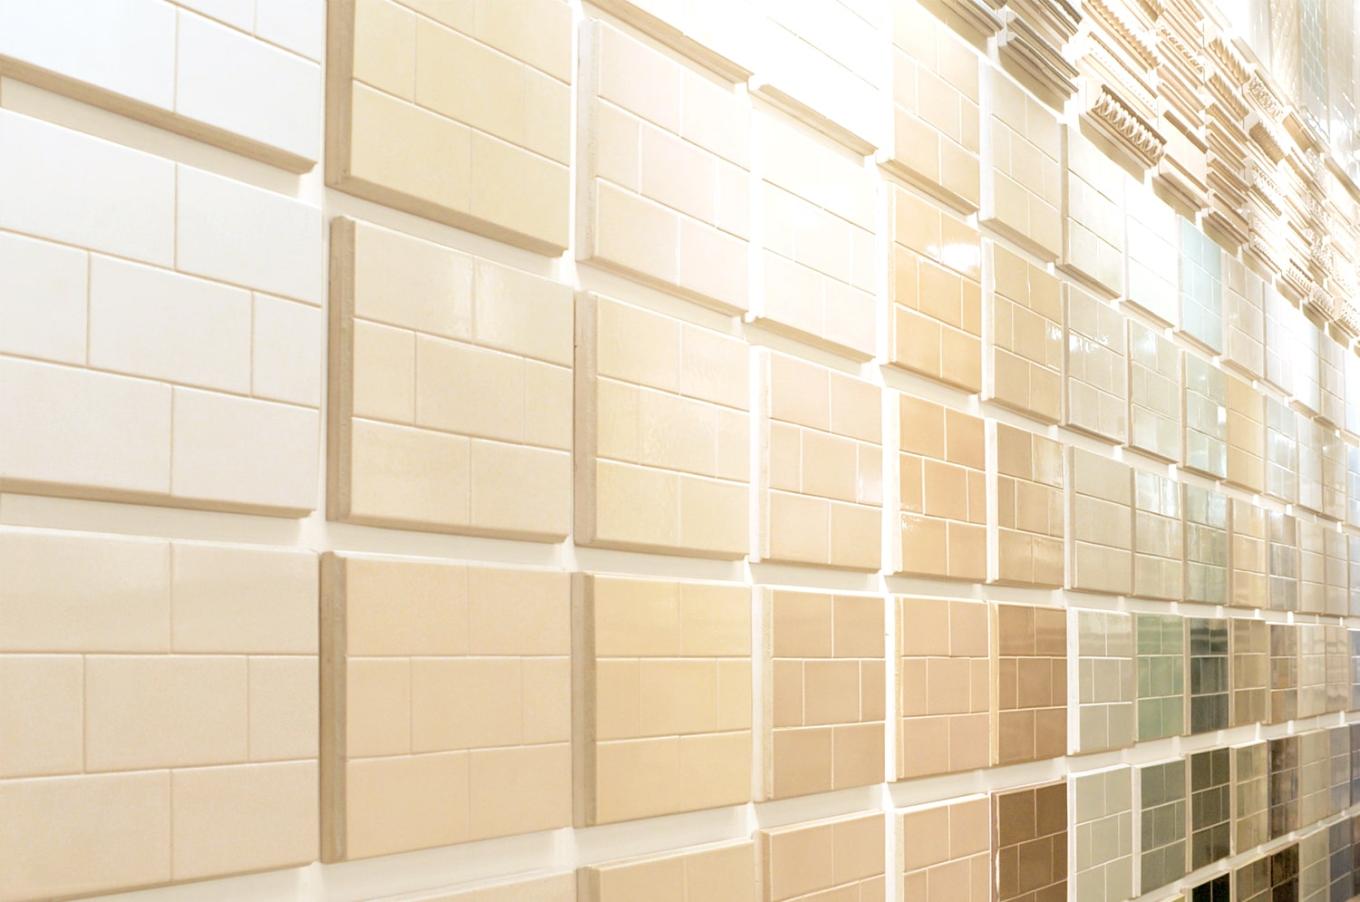 The Vermeere Ceramic Displays at the Complete Tile Collection NYC Showroom, located on 42 West 15th Street.